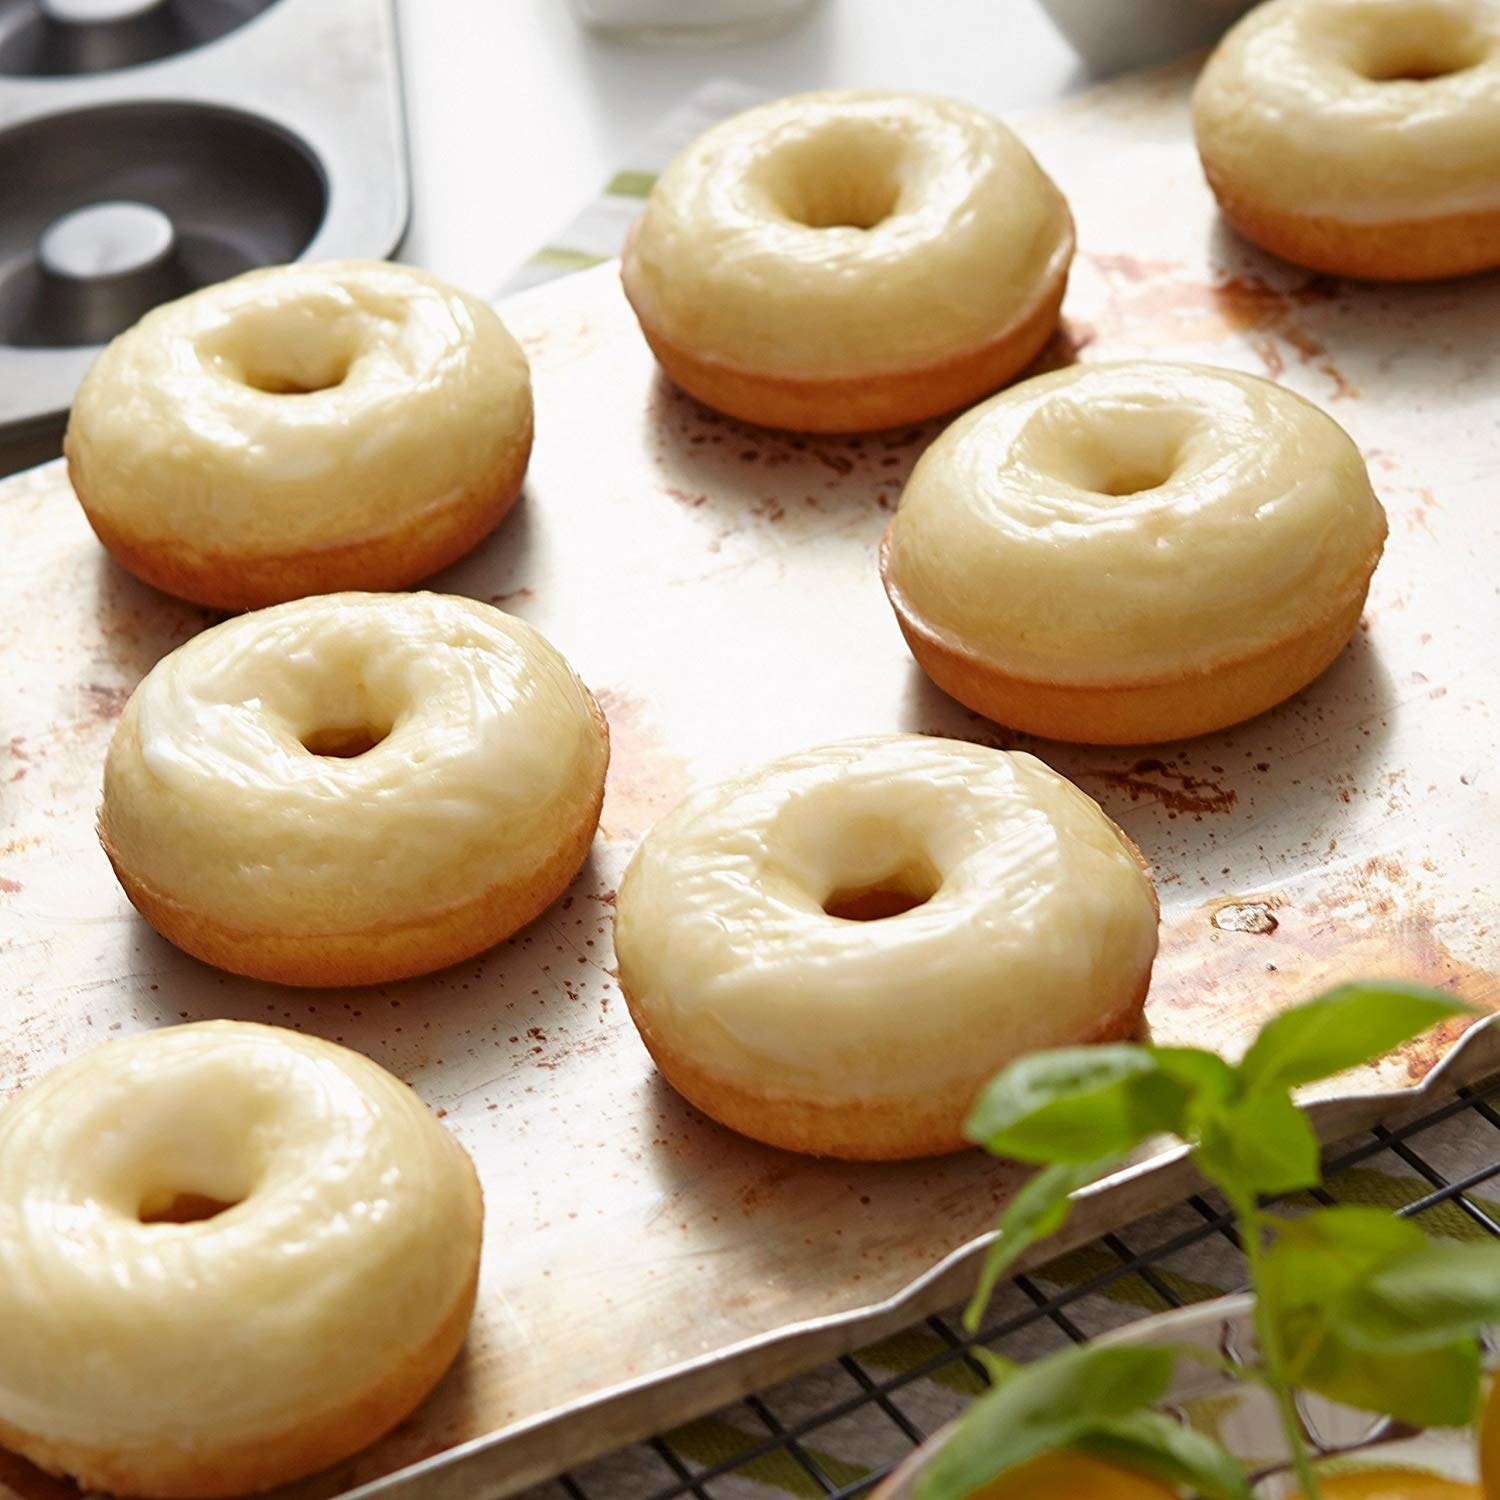 Donuts that were made in the pan